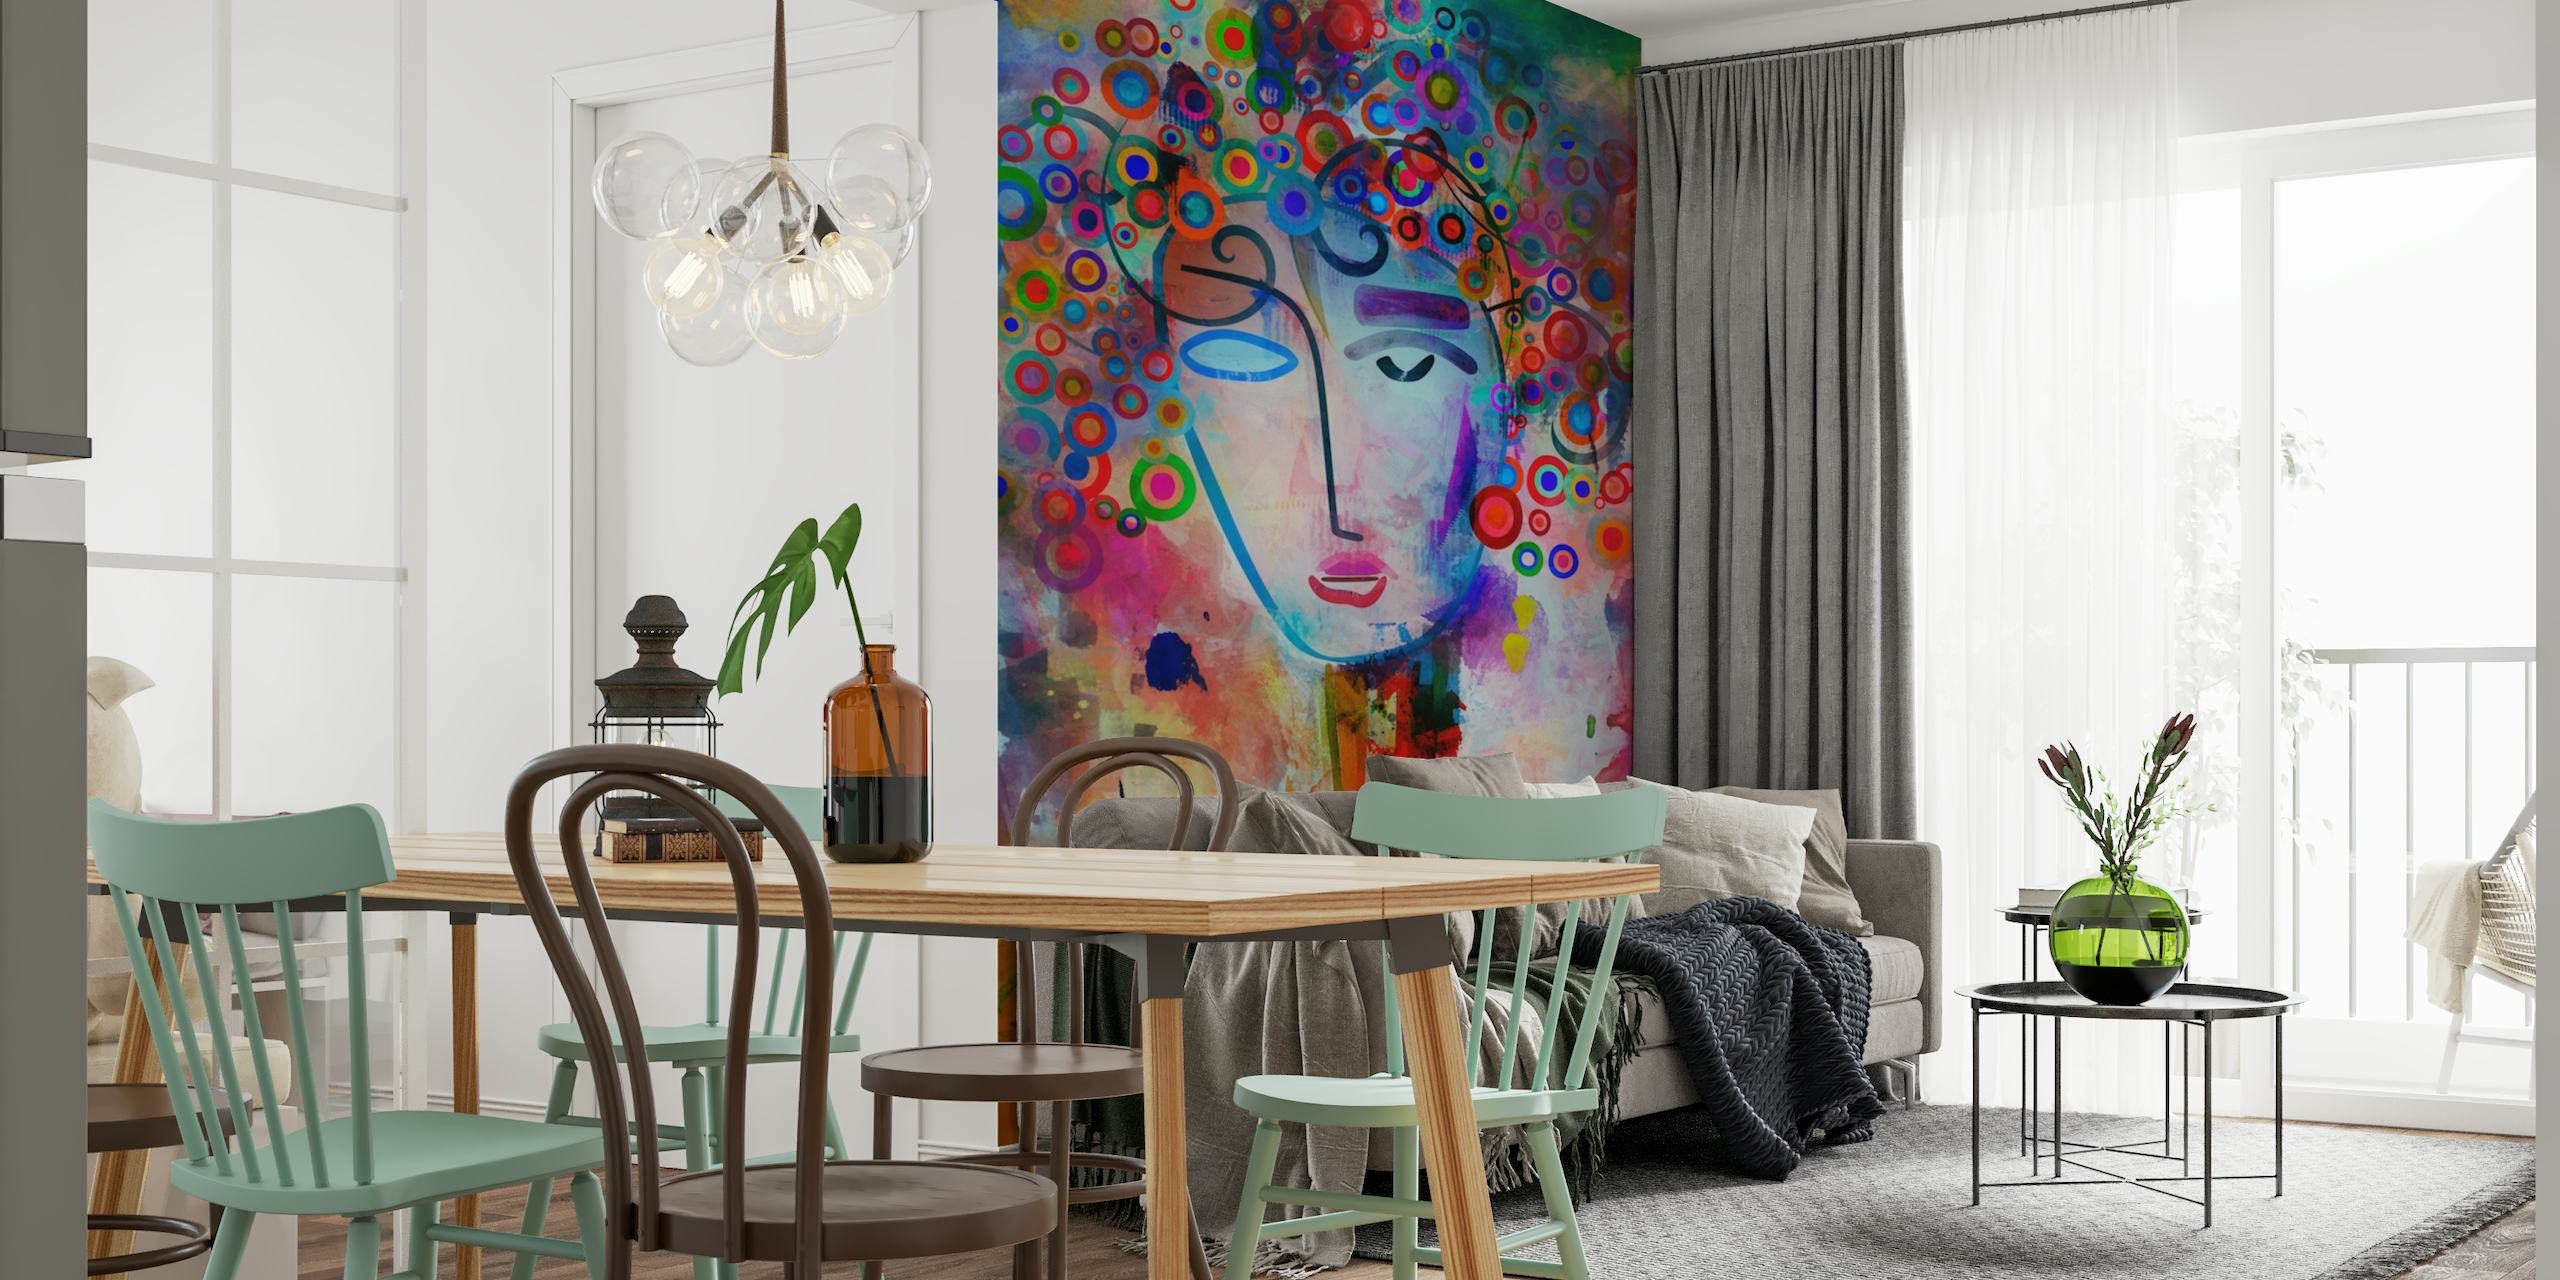 Abstract colorful wall mural featuring an imaginative representation of a mind in a brainstorming session